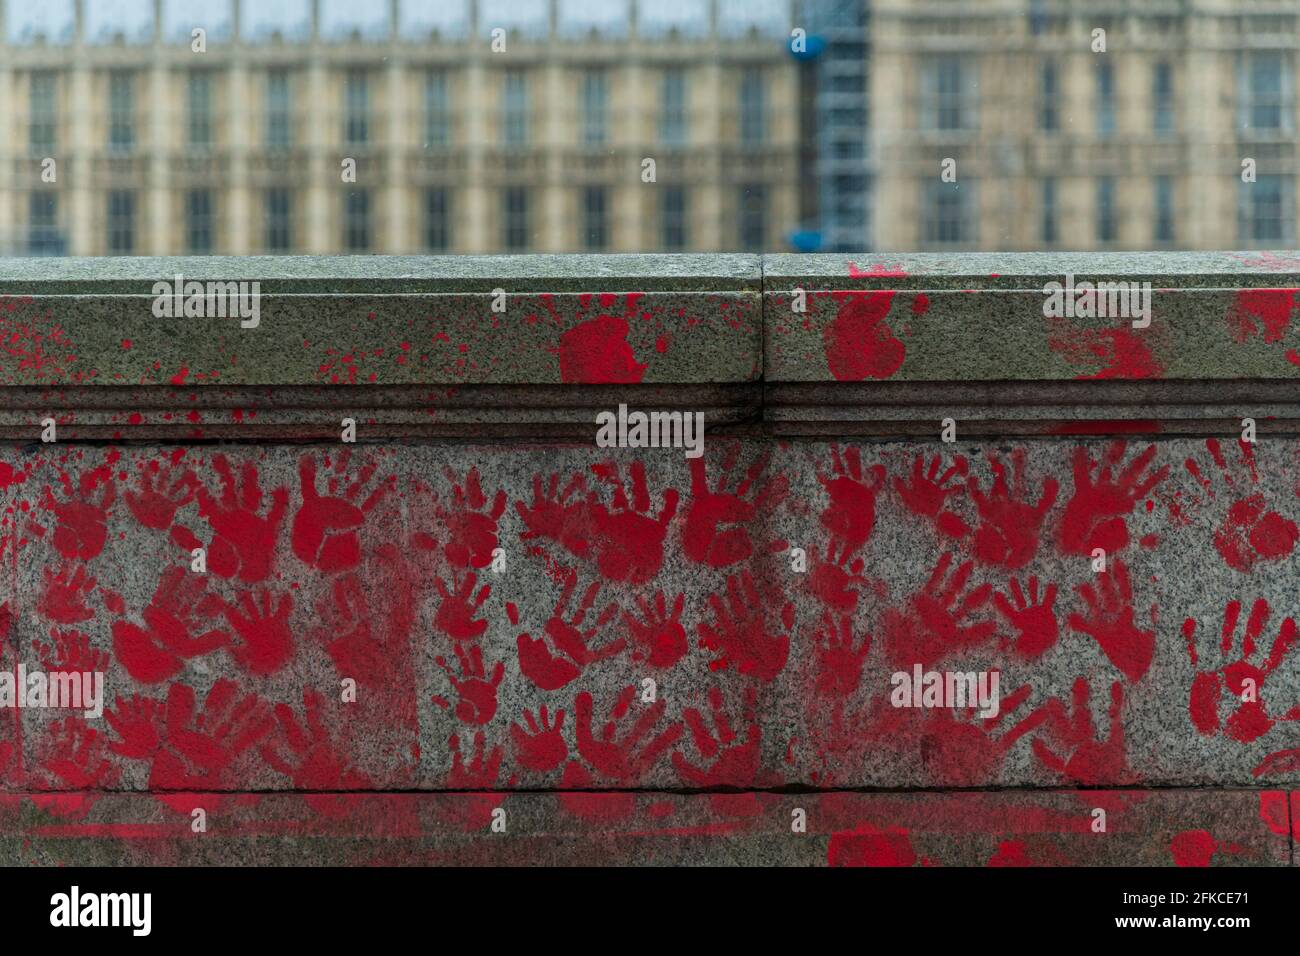 London, UK. 30th Apr, 2021. People have added a Knife Crime Memorial wall, opposite, with red hand prints instead of hearts - The national Covid Memorial Wall outside St Thomas' Hospital on the southbank is now largely completed. Mourners have drawn hearts by hand on a wall opposite Parliament in London. Credit: Guy Bell/Alamy Live News Stock Photo